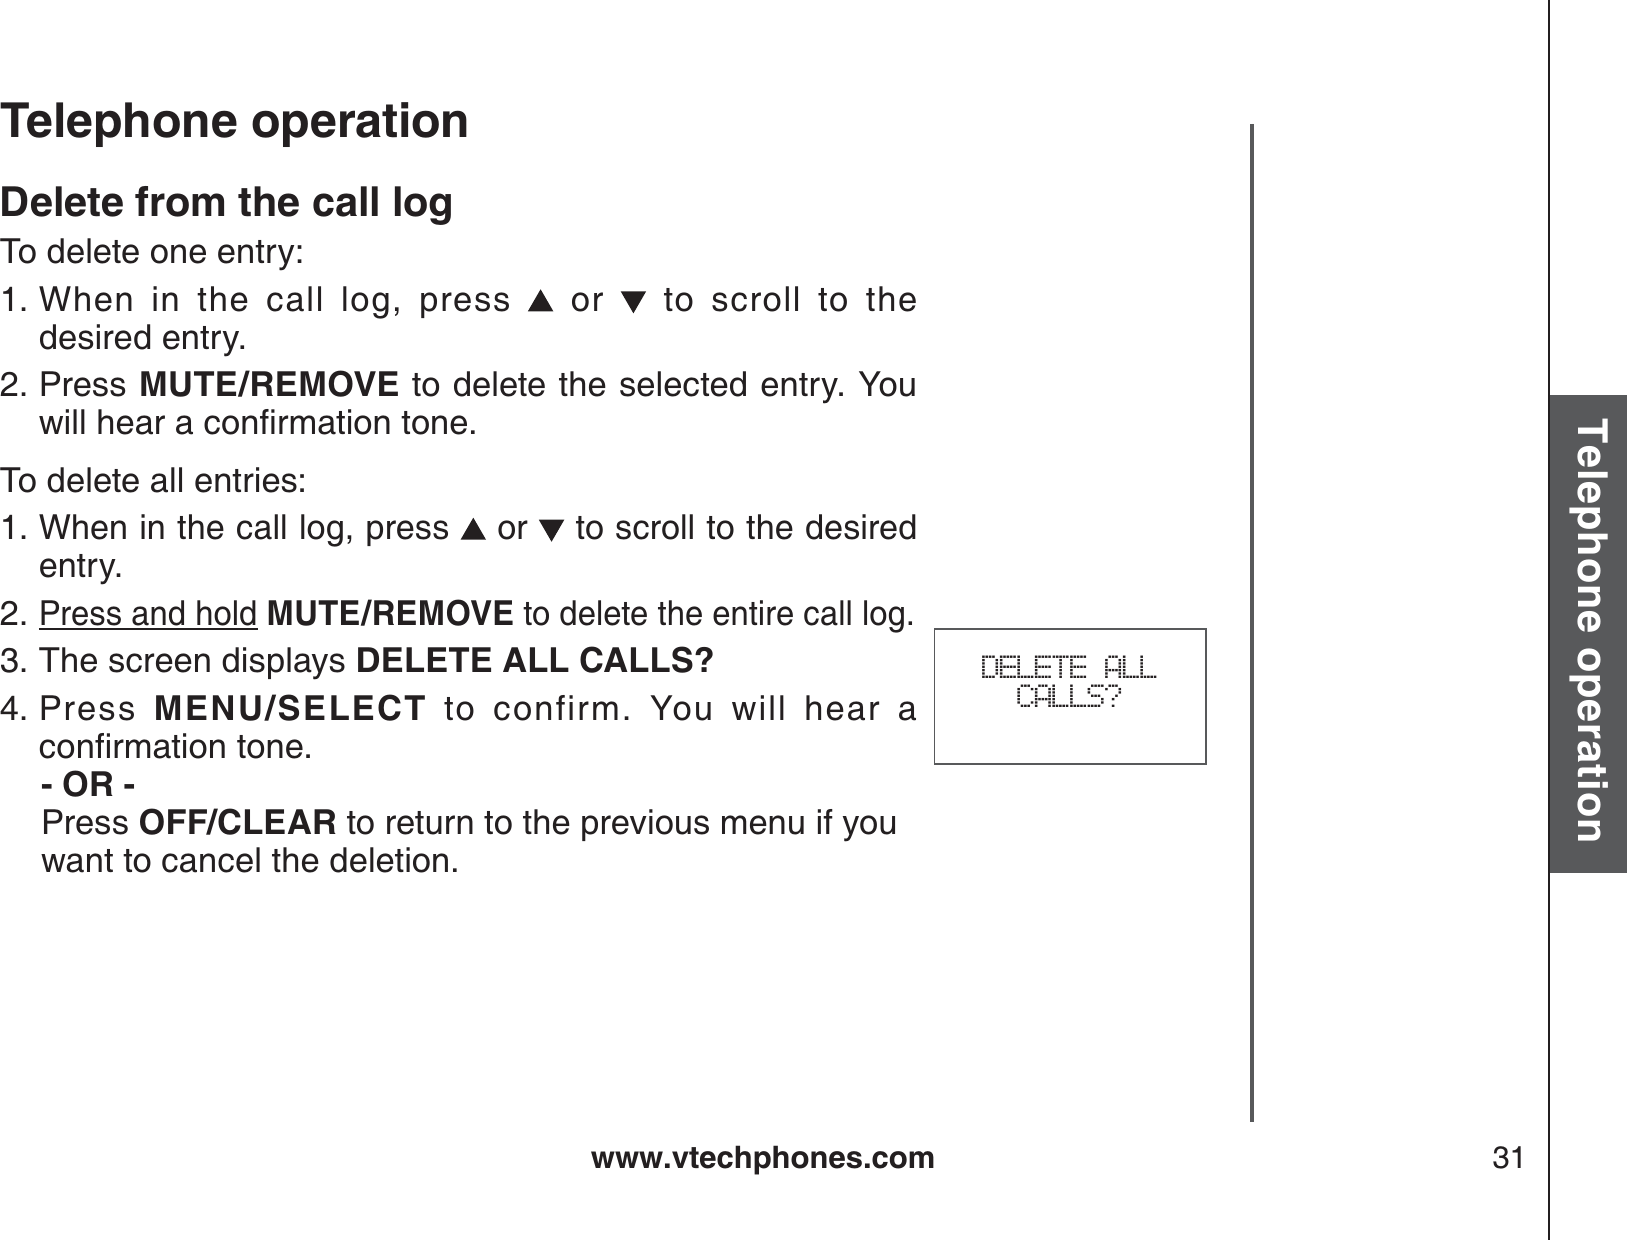 www.vtechphones.com 31Basic operationTelephone operationTelephone operationDelete from the call logTo delete one entry:When in the call log, press   or   to scroll to the            desired entry.Press MUTE/REMOVE to delete the selected entry. You YKNNJGCTCEQPſTOCVKQPVQPGTo delete all entries:When in the call log, press   or   to scroll to the desired entry.Press and hold MUTE/REMOVE to delete the entire call log.The screen displays DELETE ALL CALLS?Press  MENU/SELECT to confirm. You will hear a EQPſTOCVKQPVQPG   - OR -   Press OFF/CLEAR to return to the previous menu if you    want to cancel the deletion.1.2.1.2.3.4.DELETE ALL CALLS?